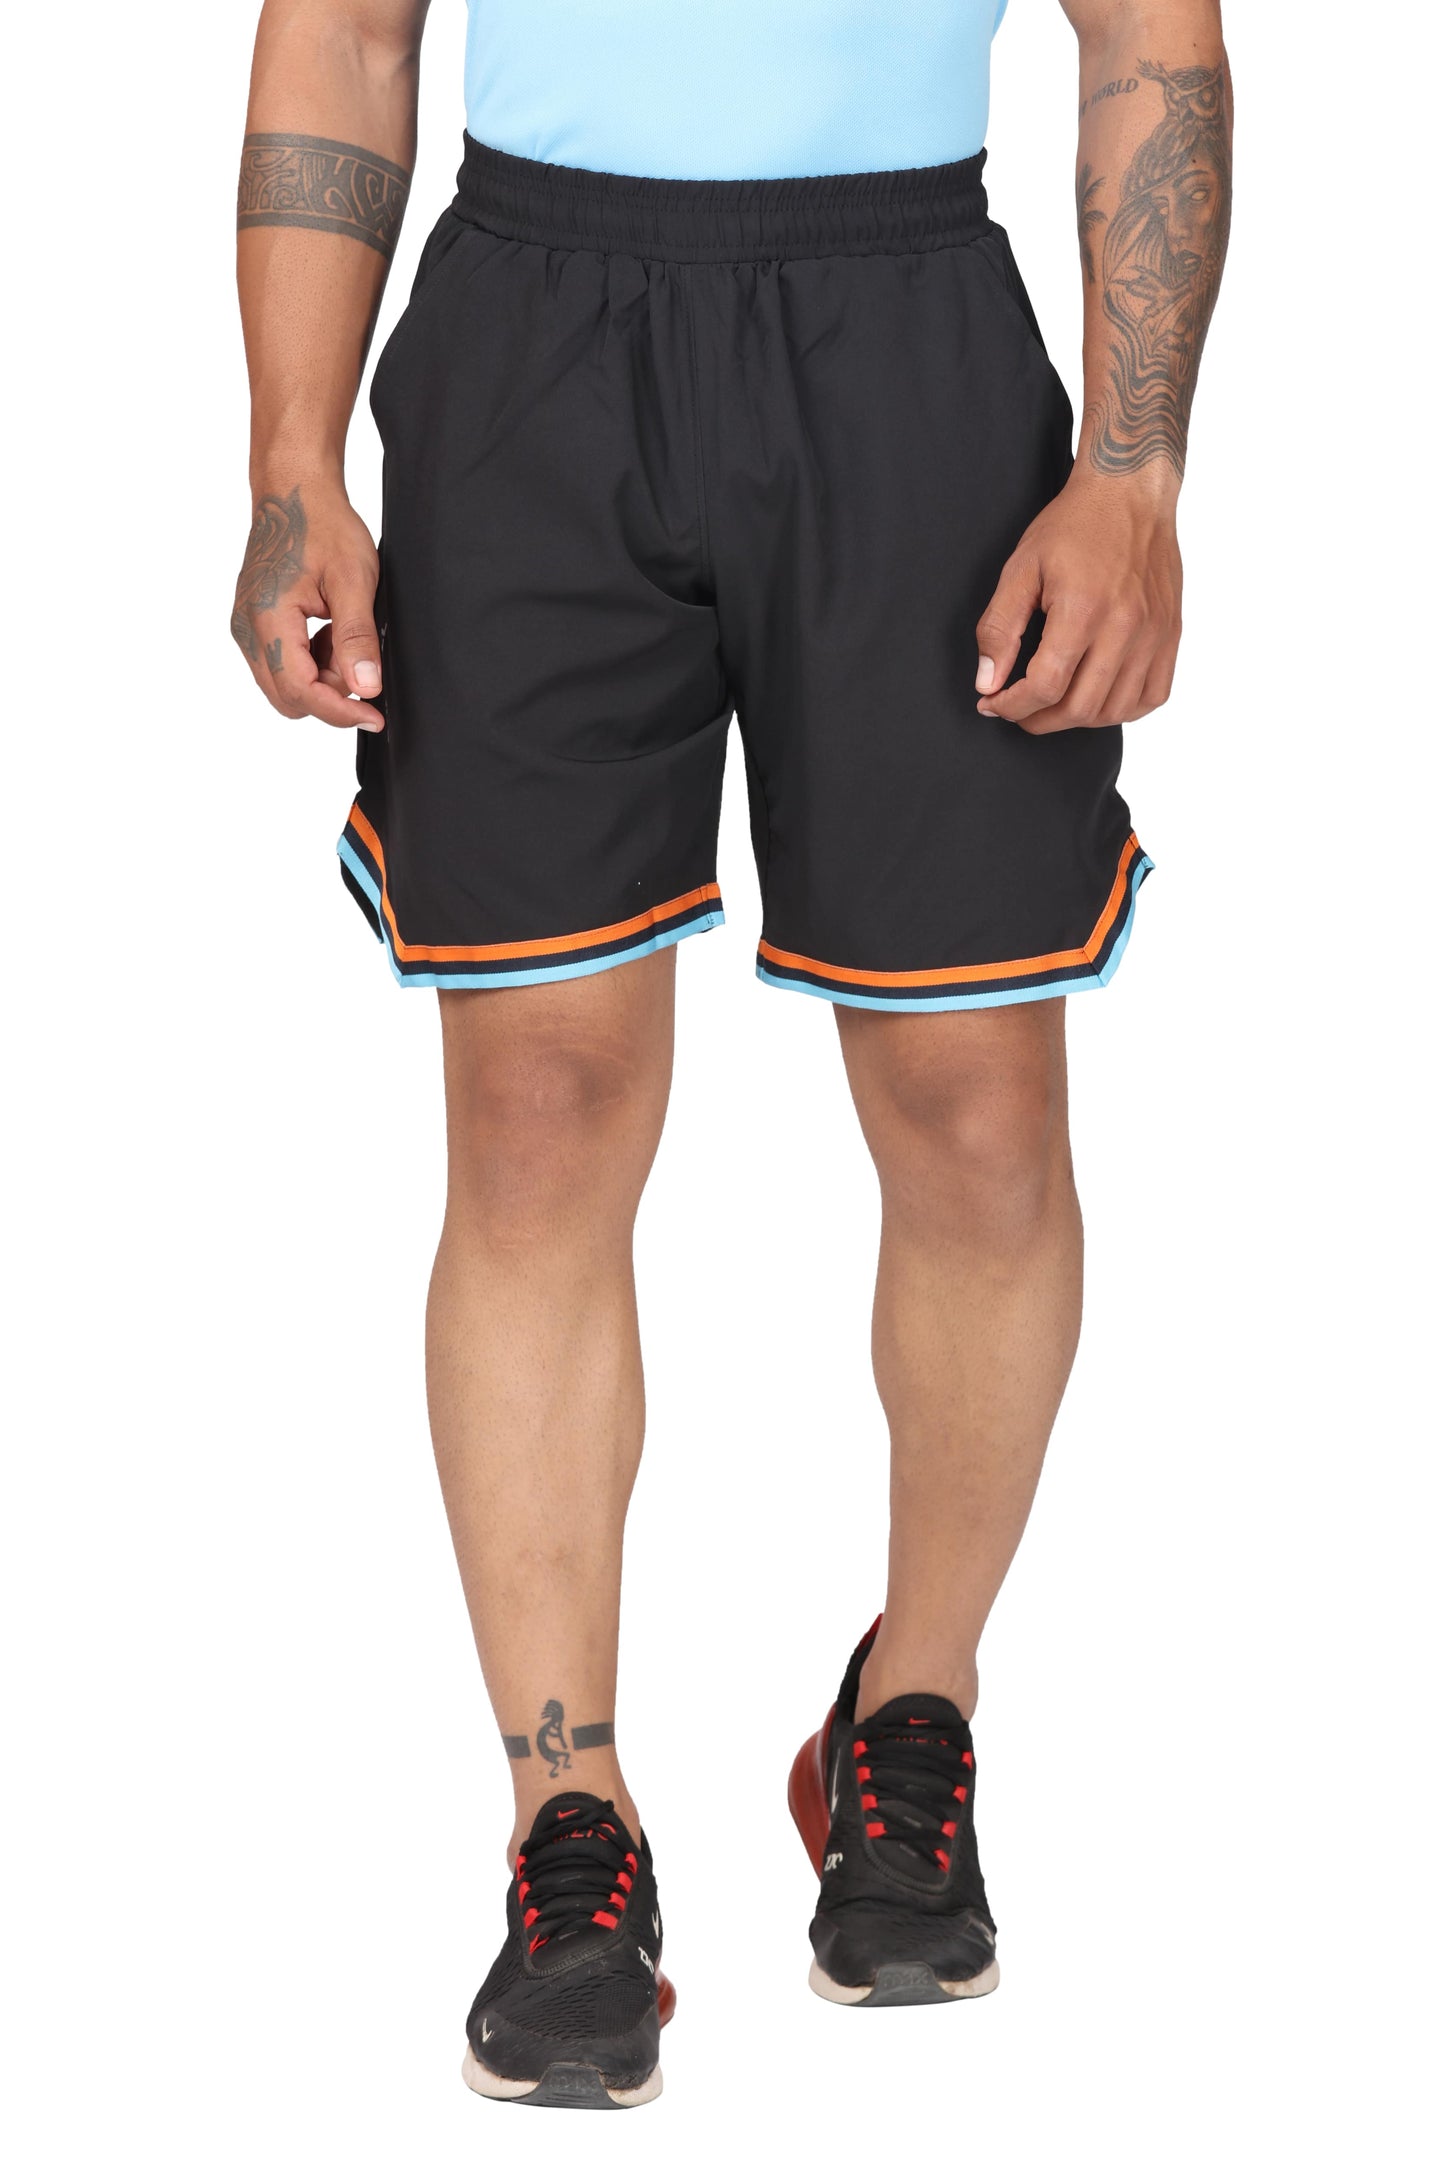 Men's Moisture-wicking and V-cut workout Black Shorts